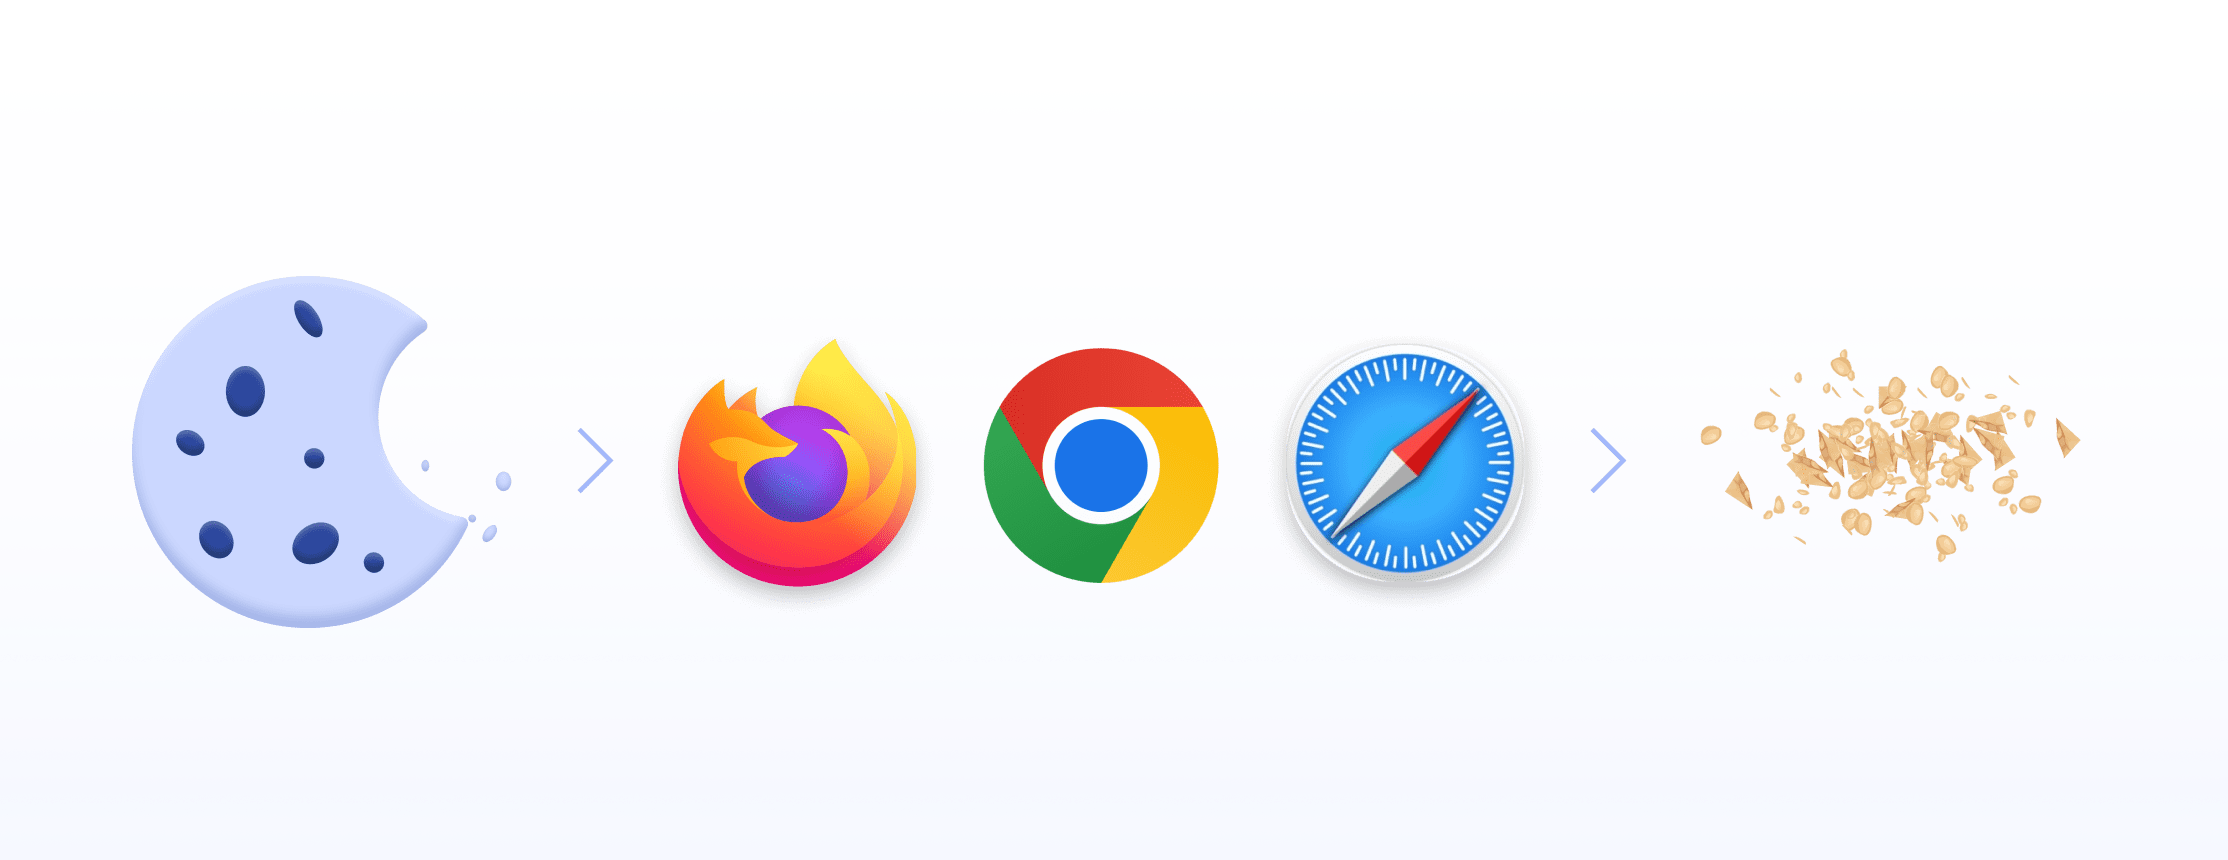 Ongoing changes in privacy - browsers limiting cookies